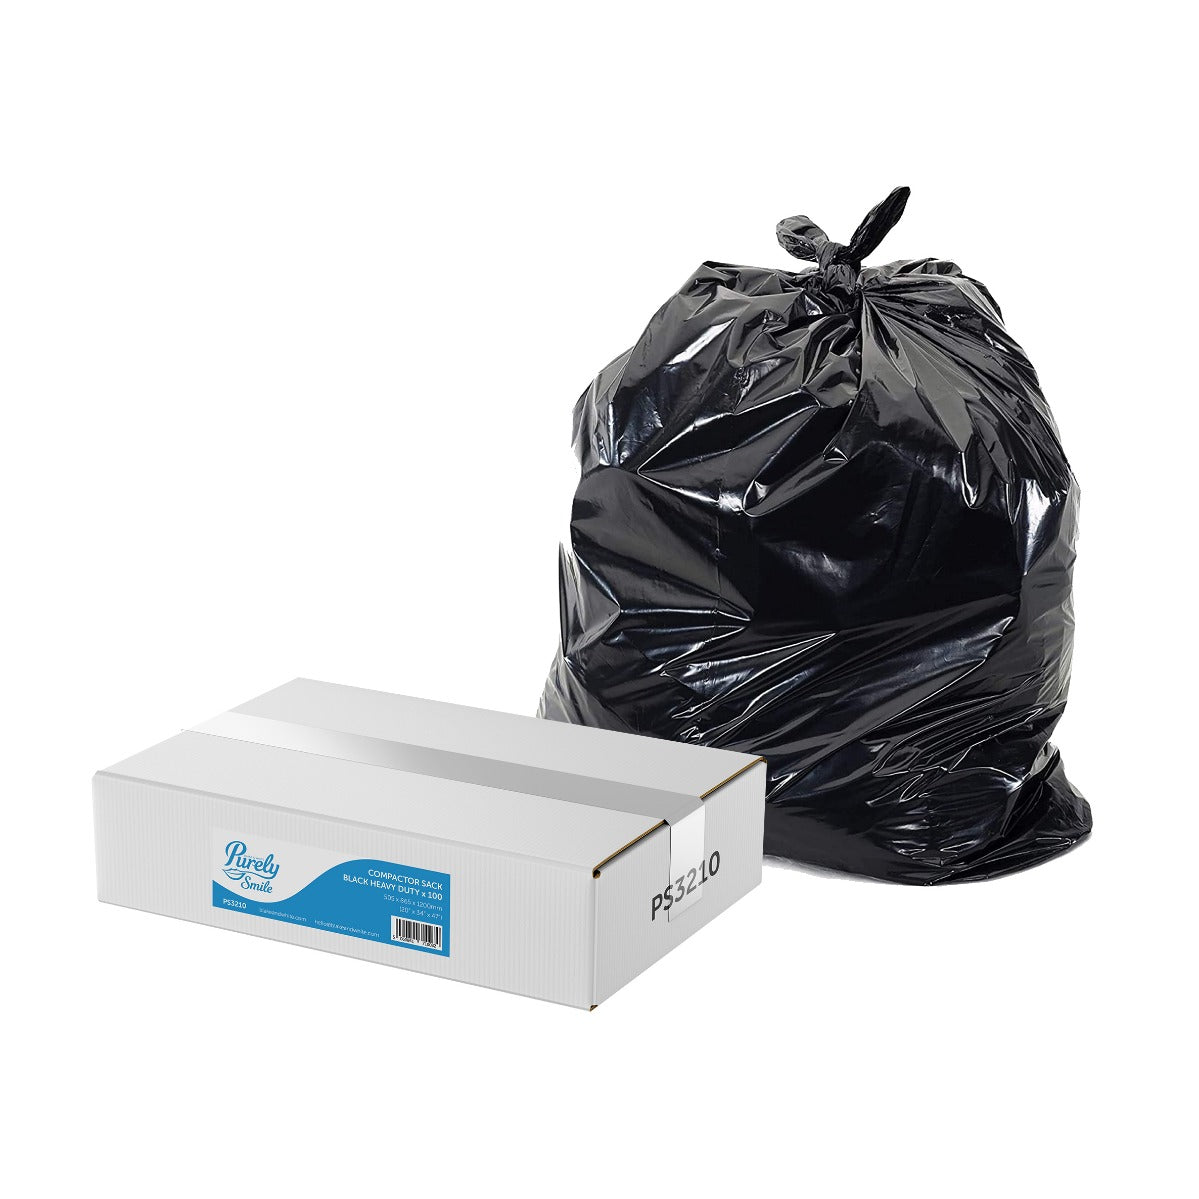 Purely Smile Compactor Sack Black Heavy Duty Box of 100